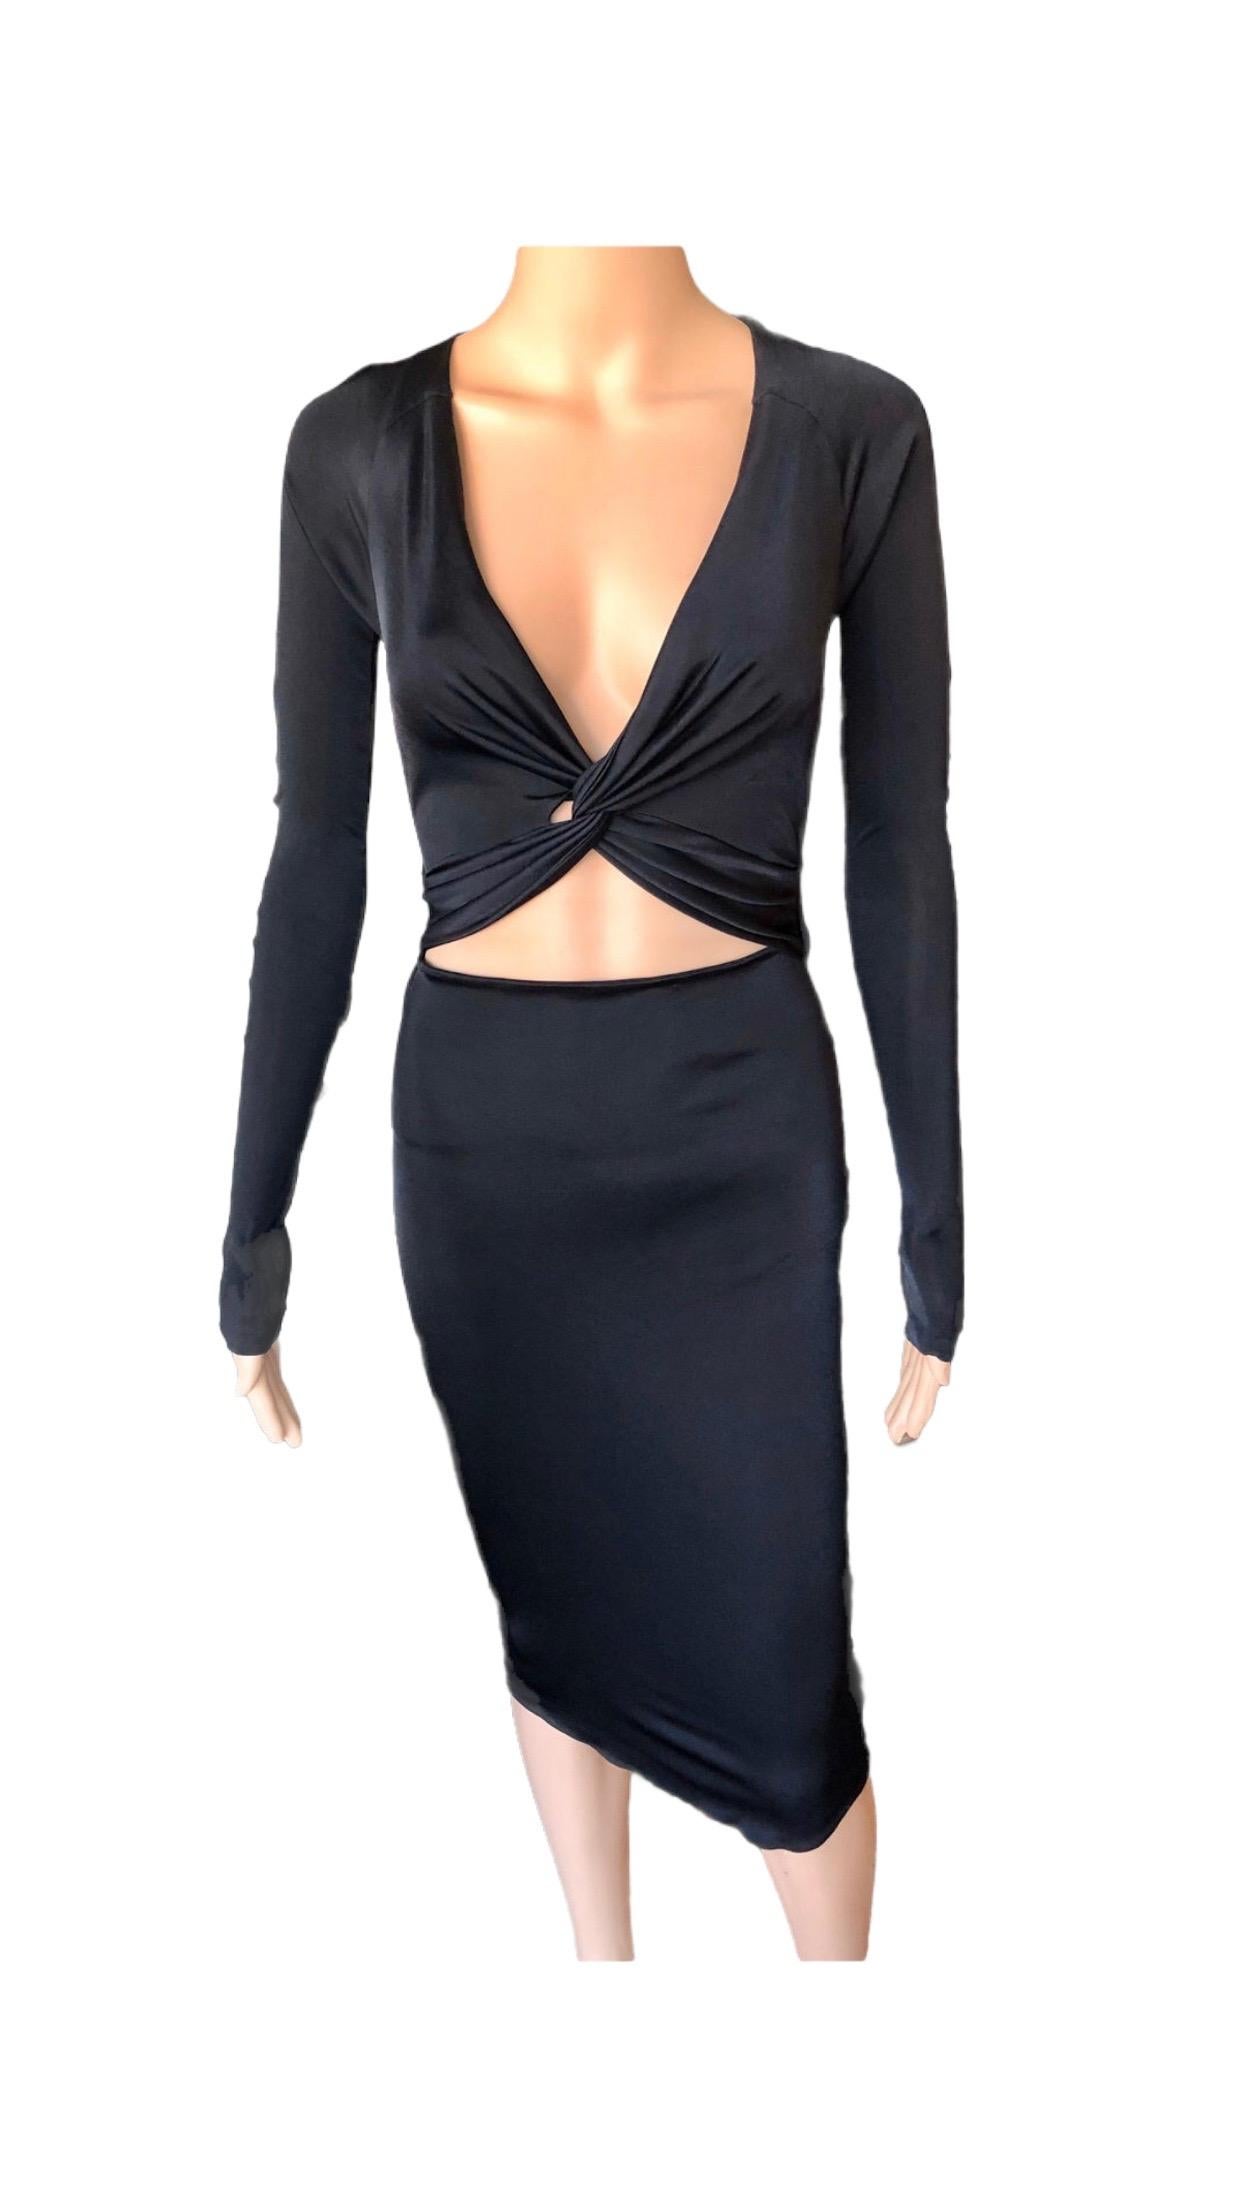 Gucci S/S 2005 Tom Ford Plunging Cutout Backless Bodycon Black Dress For Sale 5